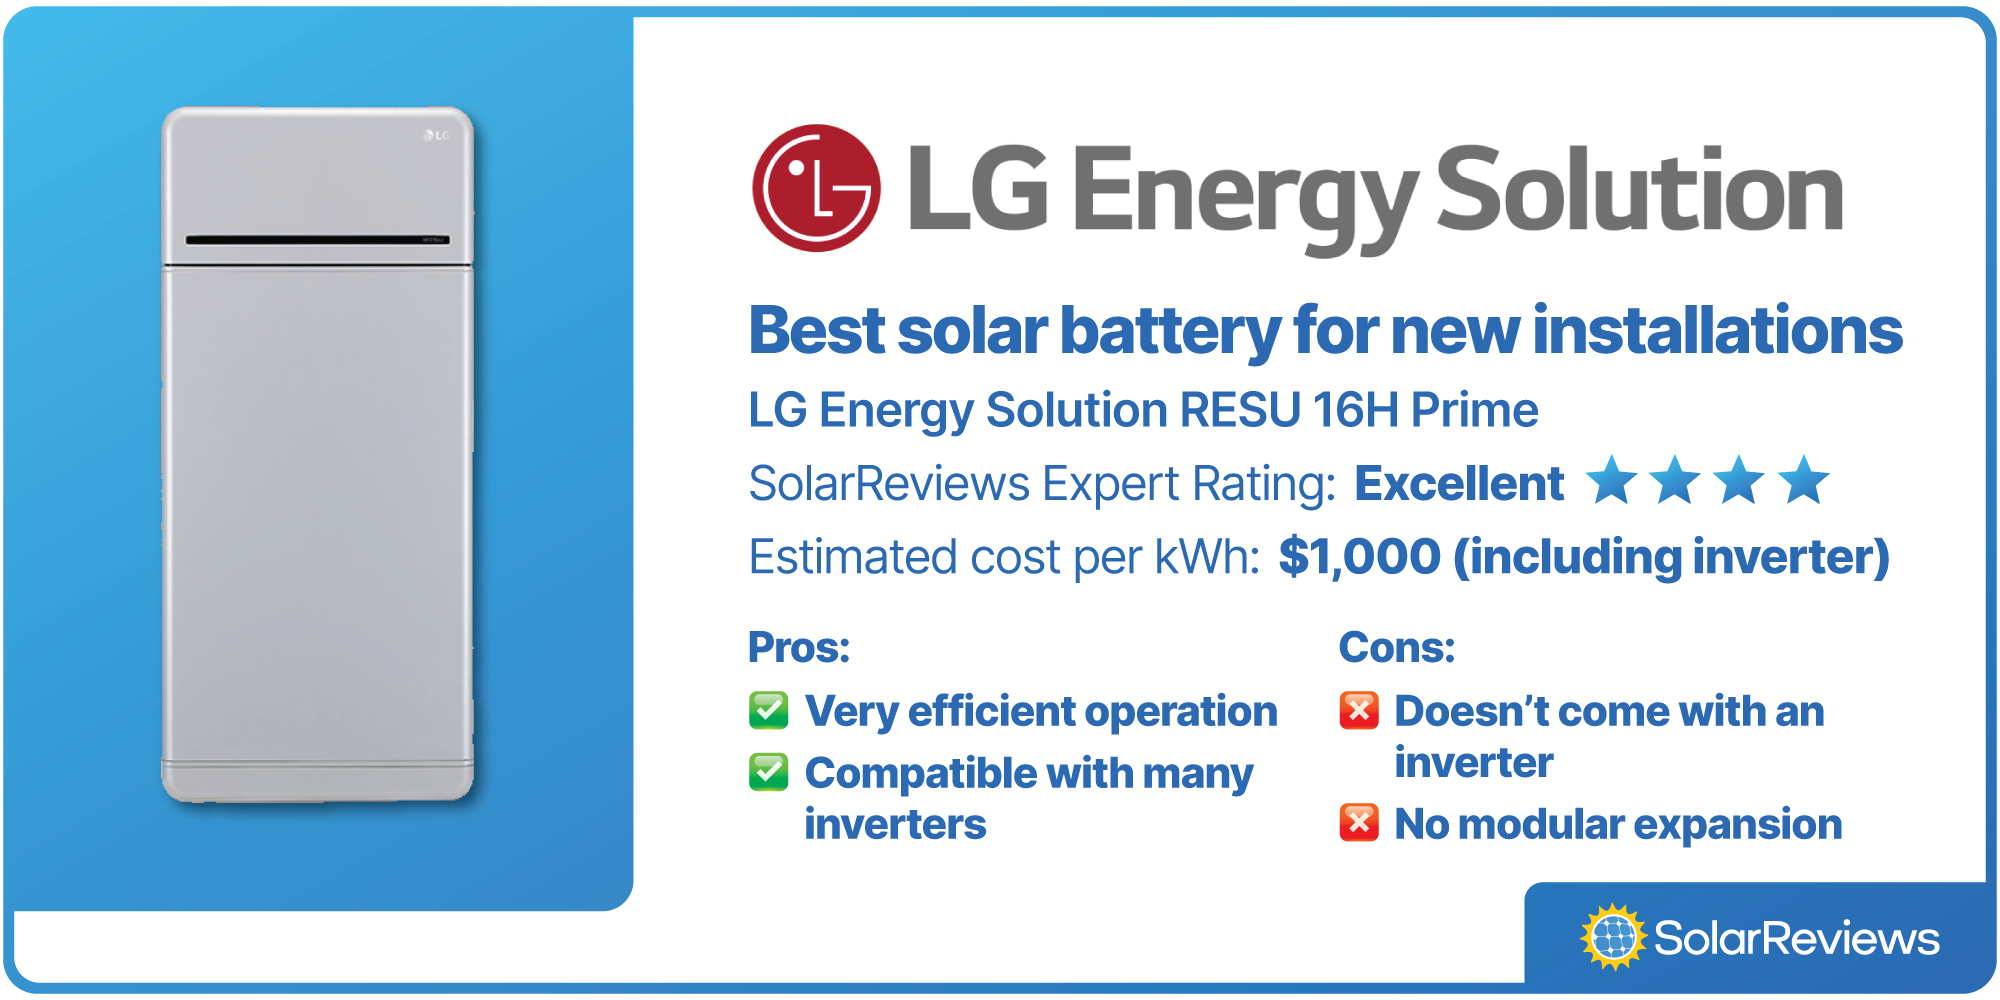 LG Energy Solution RESU 16H was voted best solar battery for new installations, with a SolarReviews rating of Excellent (4 stars), and estimated cost per kWh of $1,000.
